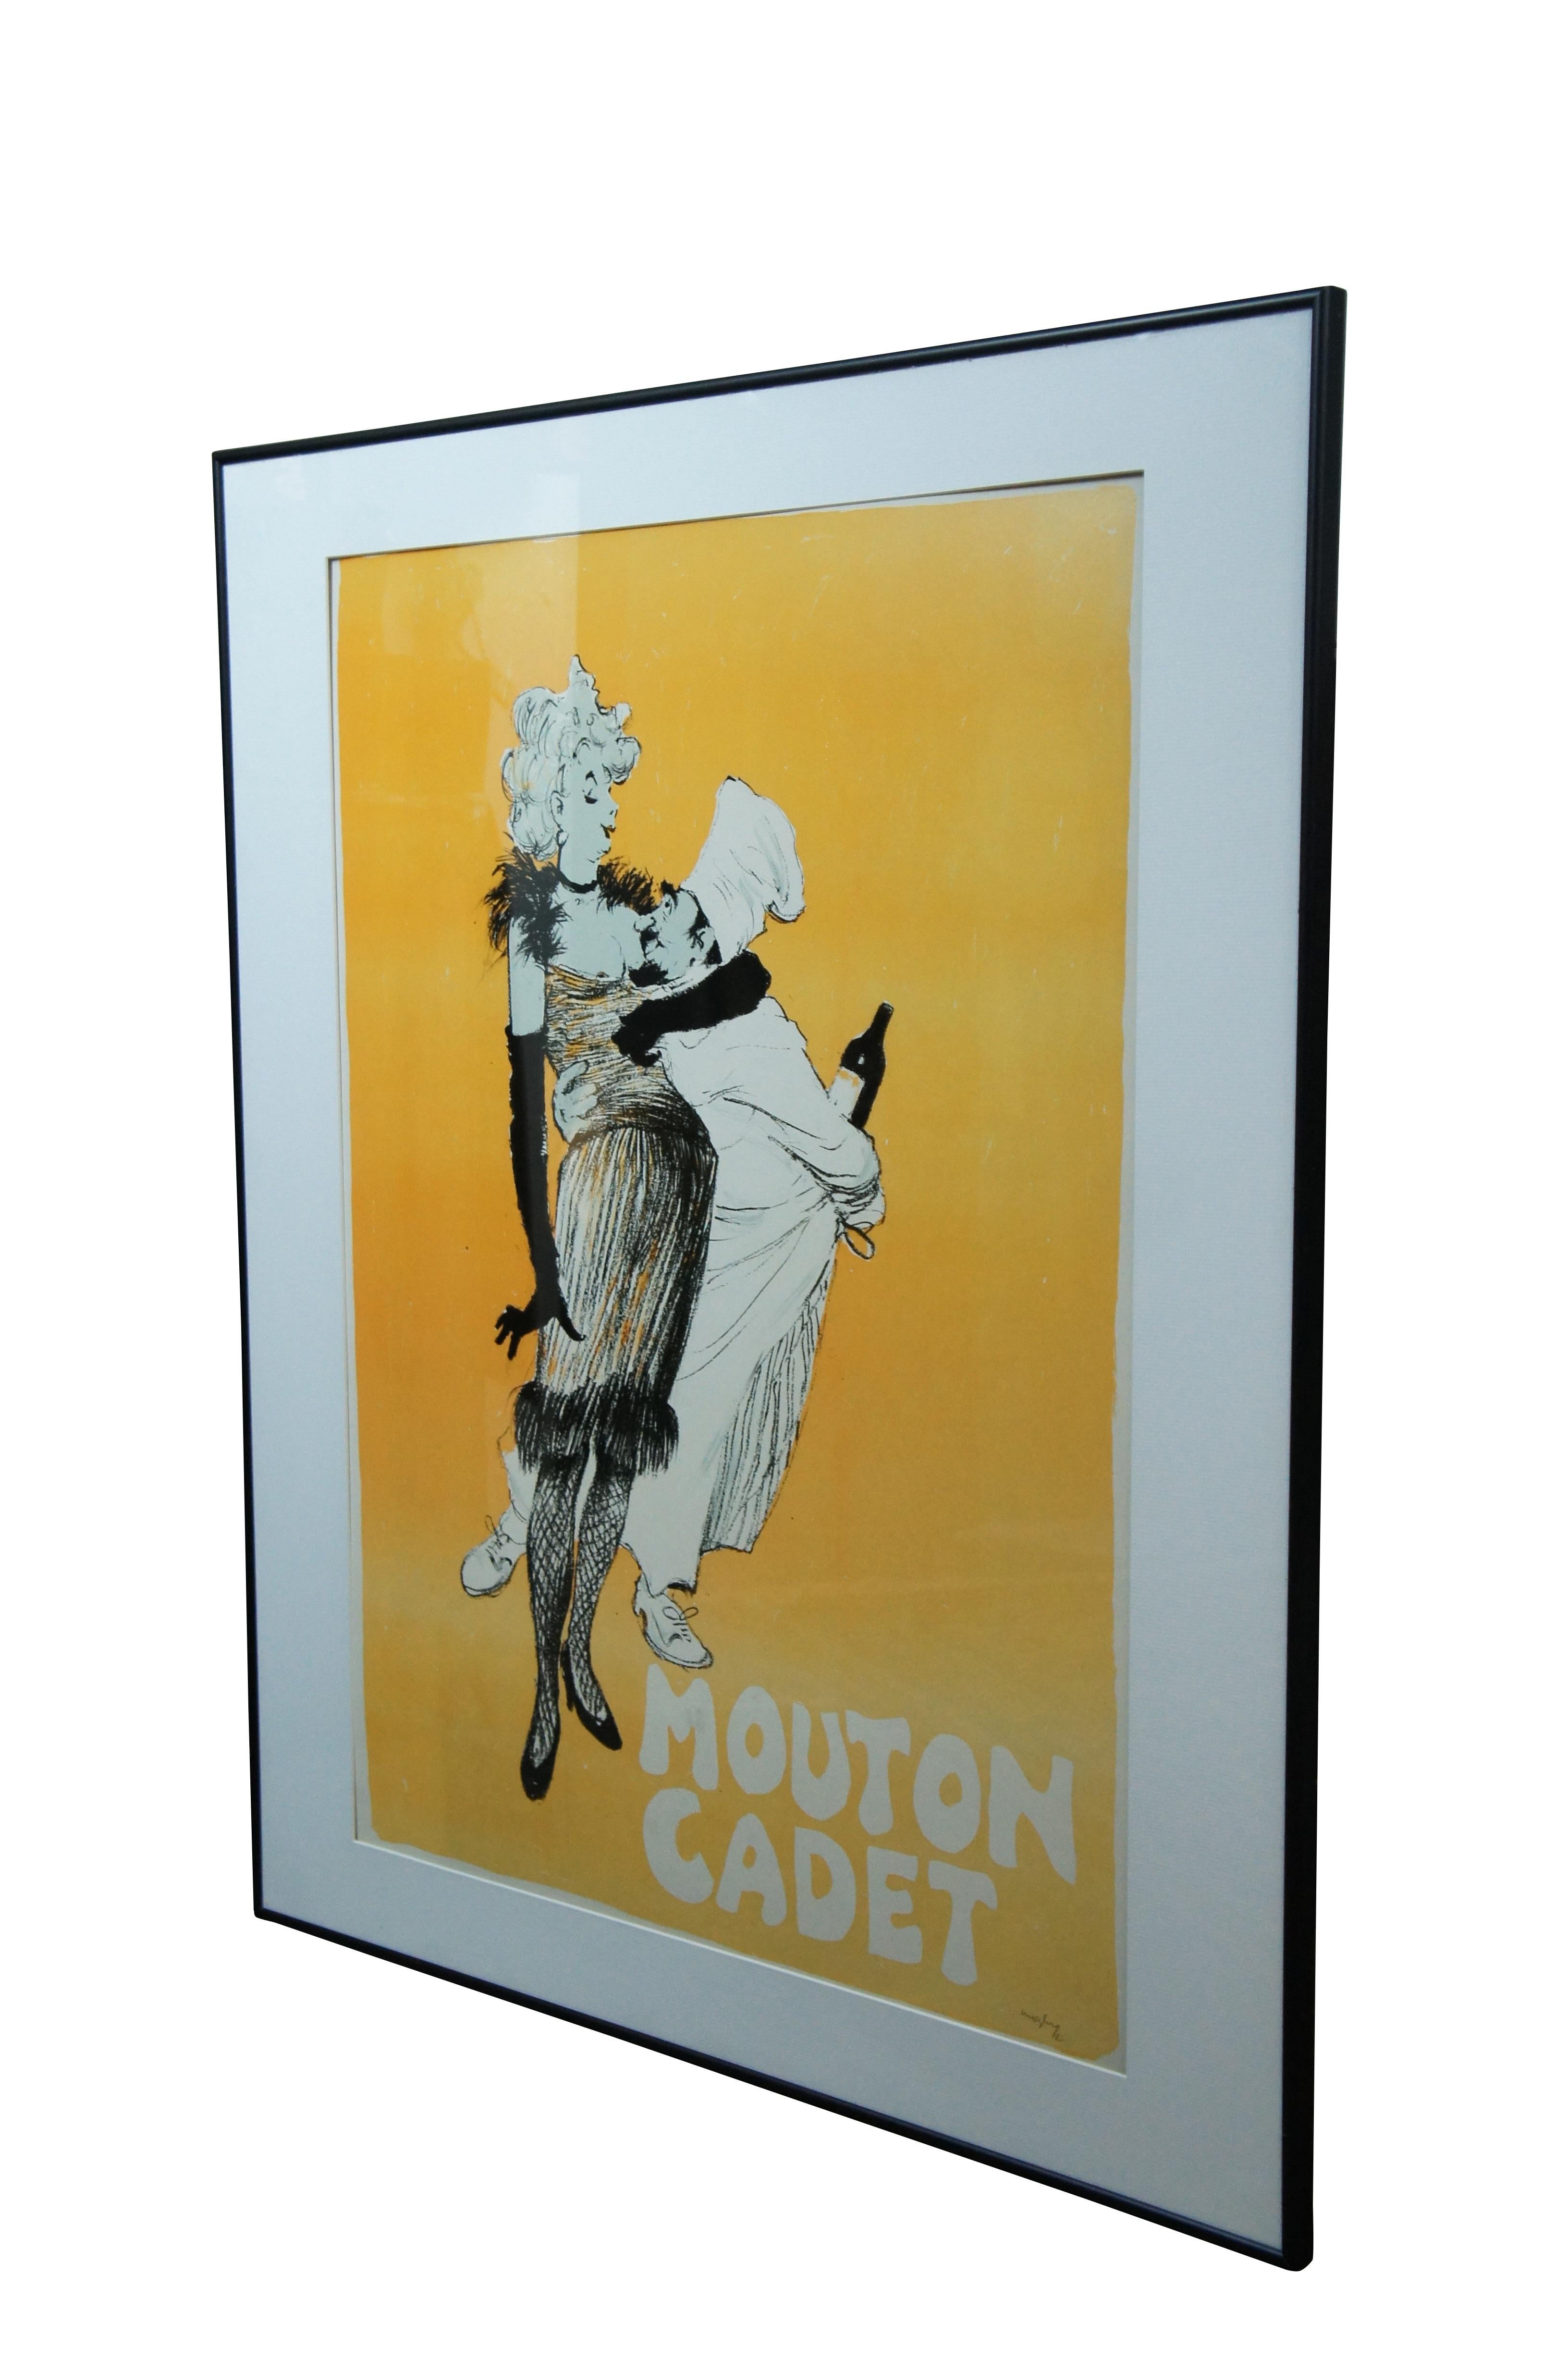 Mid century Charles Mozley poster advertisement for Mouton Cadet wine. Shows a chef with a bottle of wine behind his back, embracing a sparsely dressed can-can dancer or lady of the night on a yellow background. Similar in style to the Art Nouveau